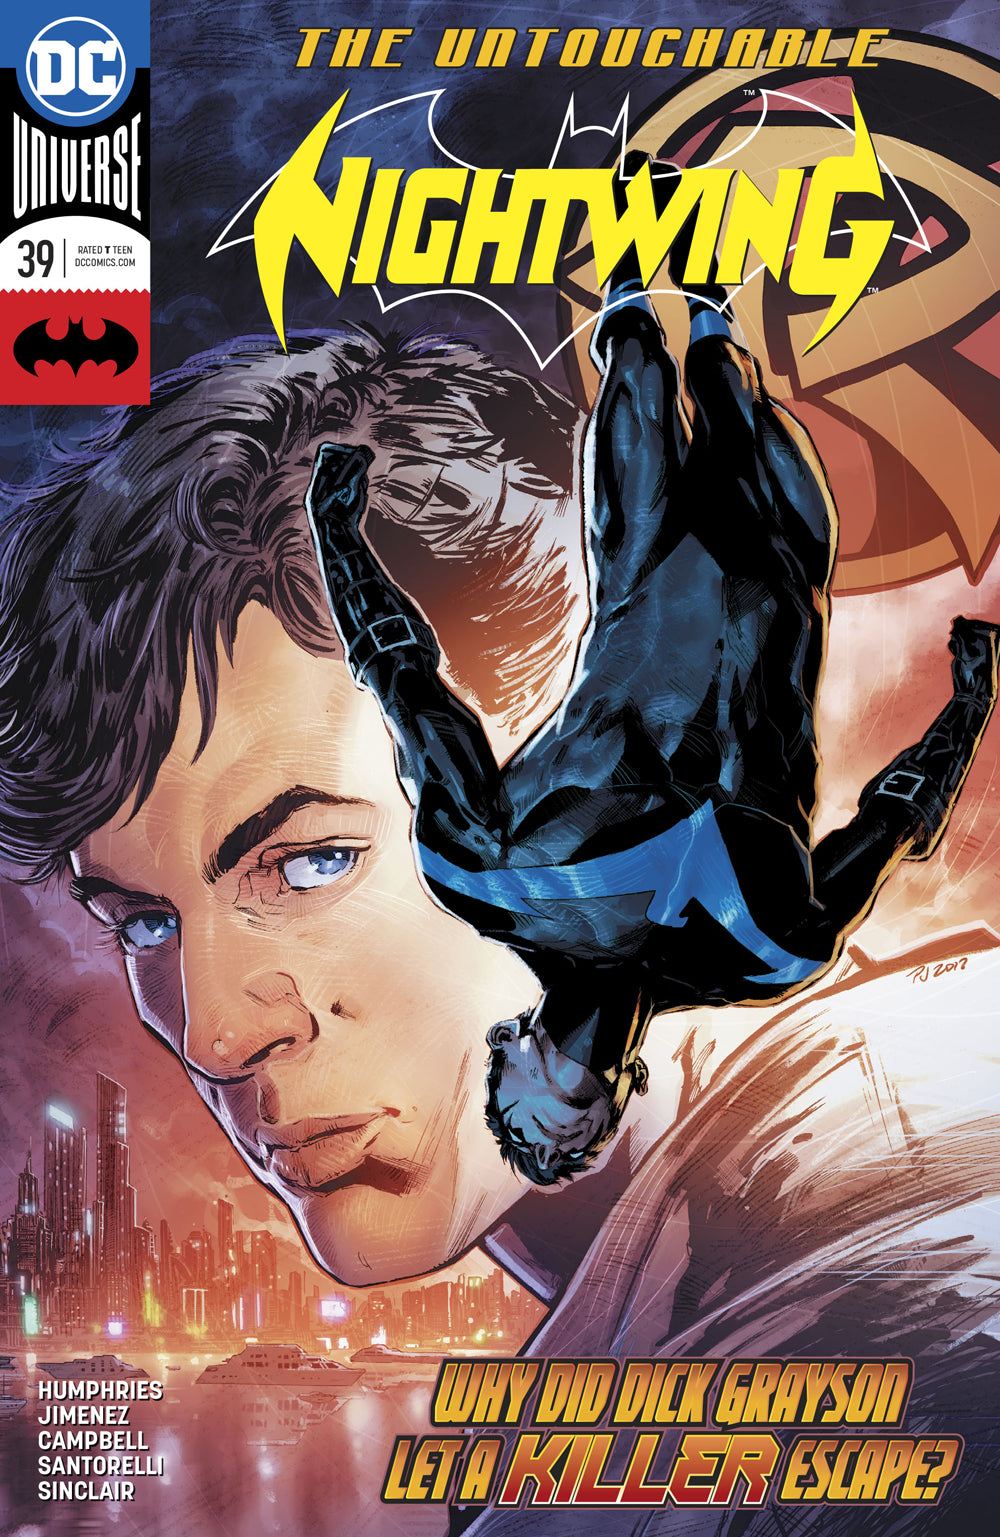 NIGHTWING #39 COVER